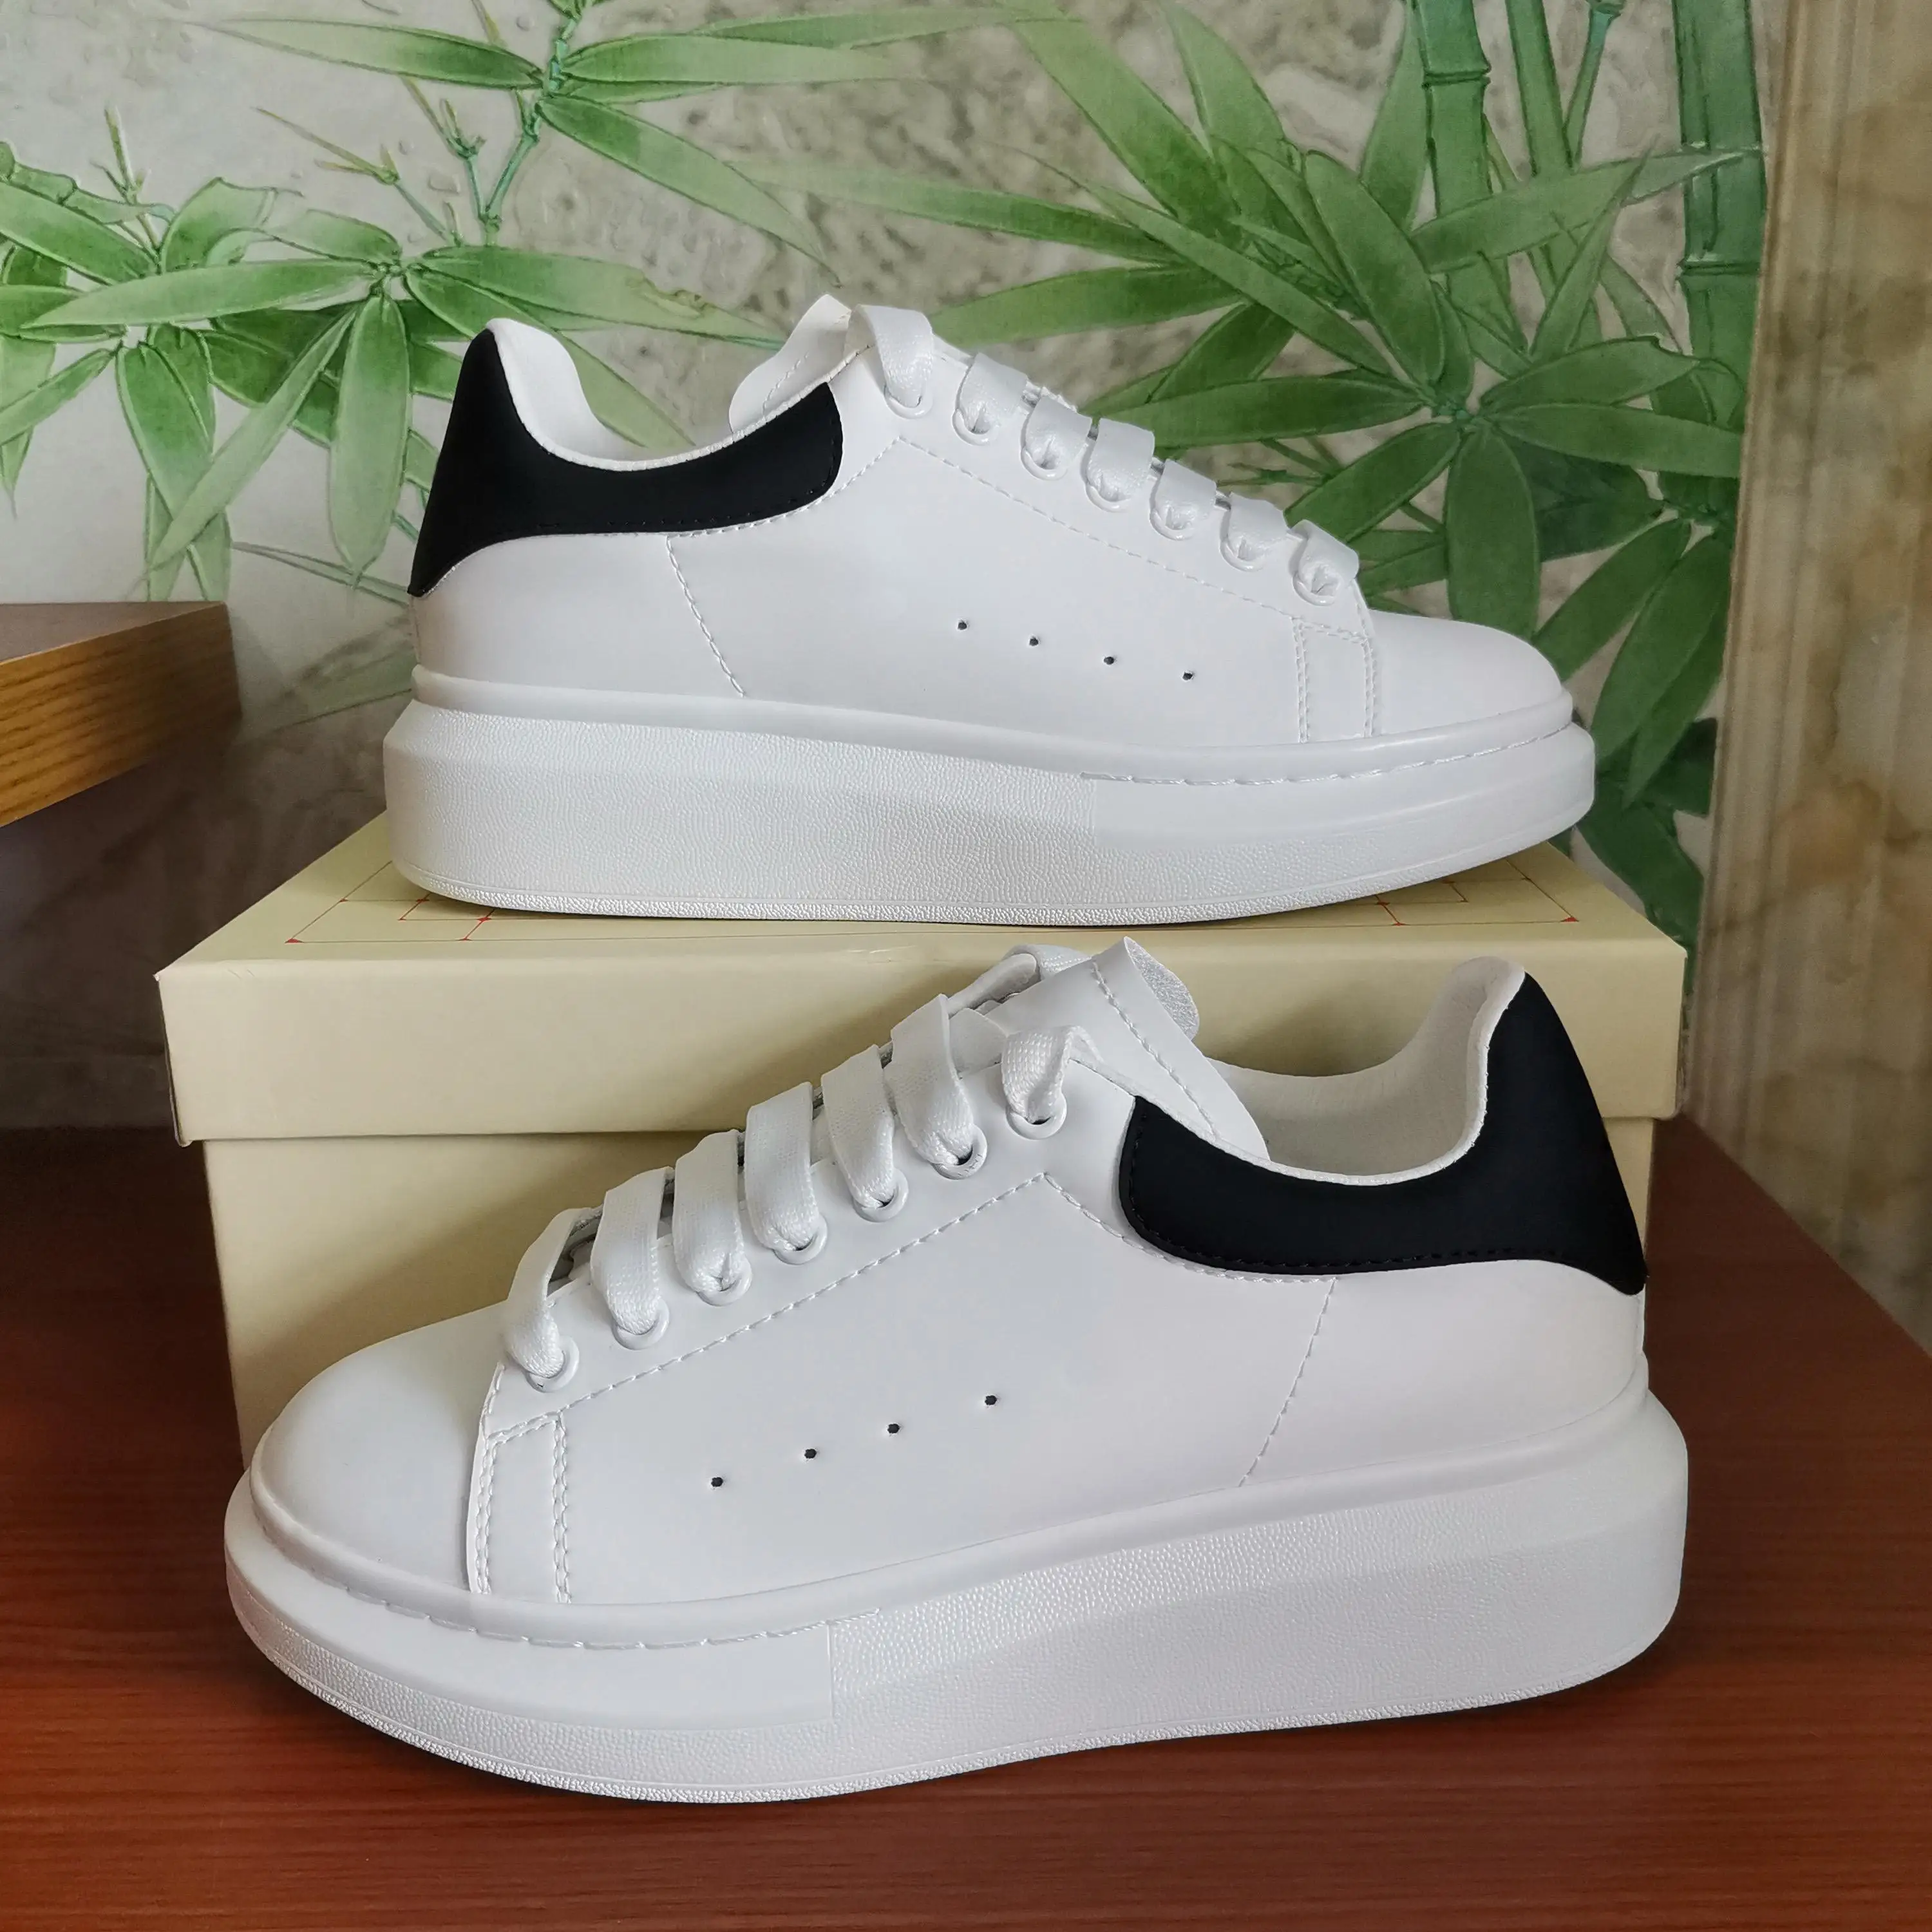 

With Box Top Quality Mens Womens Leather Casual Shoes Lace Up Comfort Pretty Men Women Trainers Daily Lifestyle Skateboarding